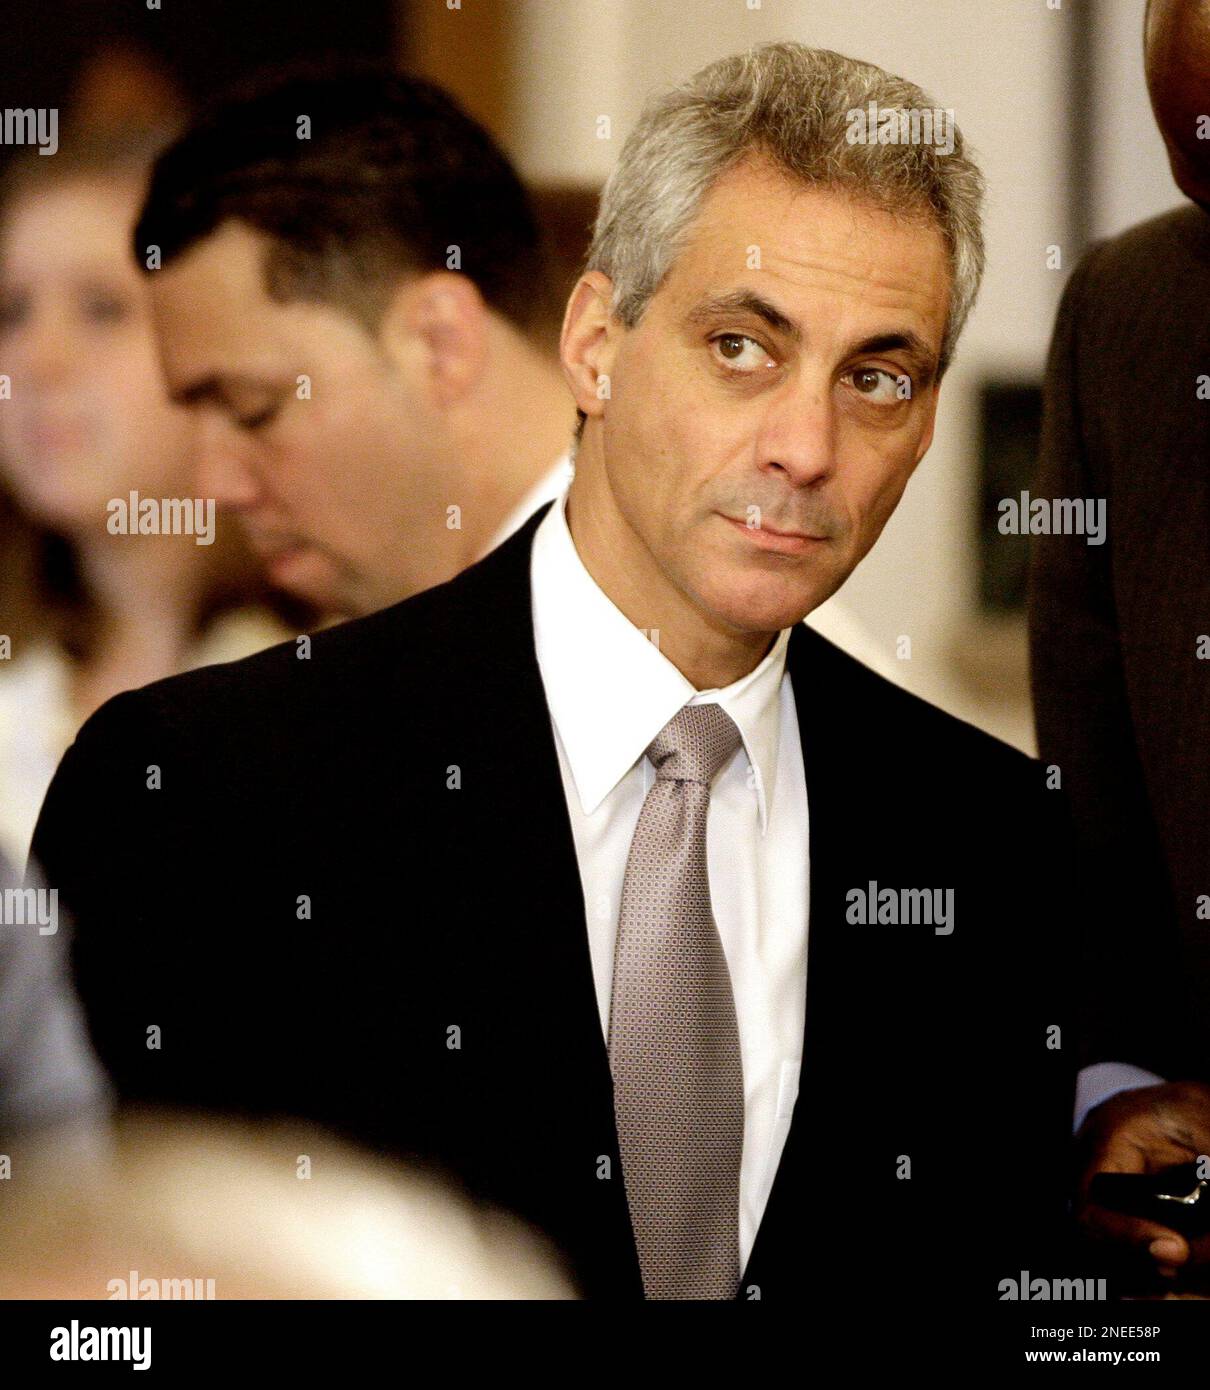 White House Chief of Staff Rahm Emanuel, watches President Barack Obama speak in the East Room of the White House in Washington, Monday, Jan. 25, 2010, during a ceremony where the president honored the NBA basketball champion Los Angeles Laker. (AP Photo/Alex Brandon) Stock Photo